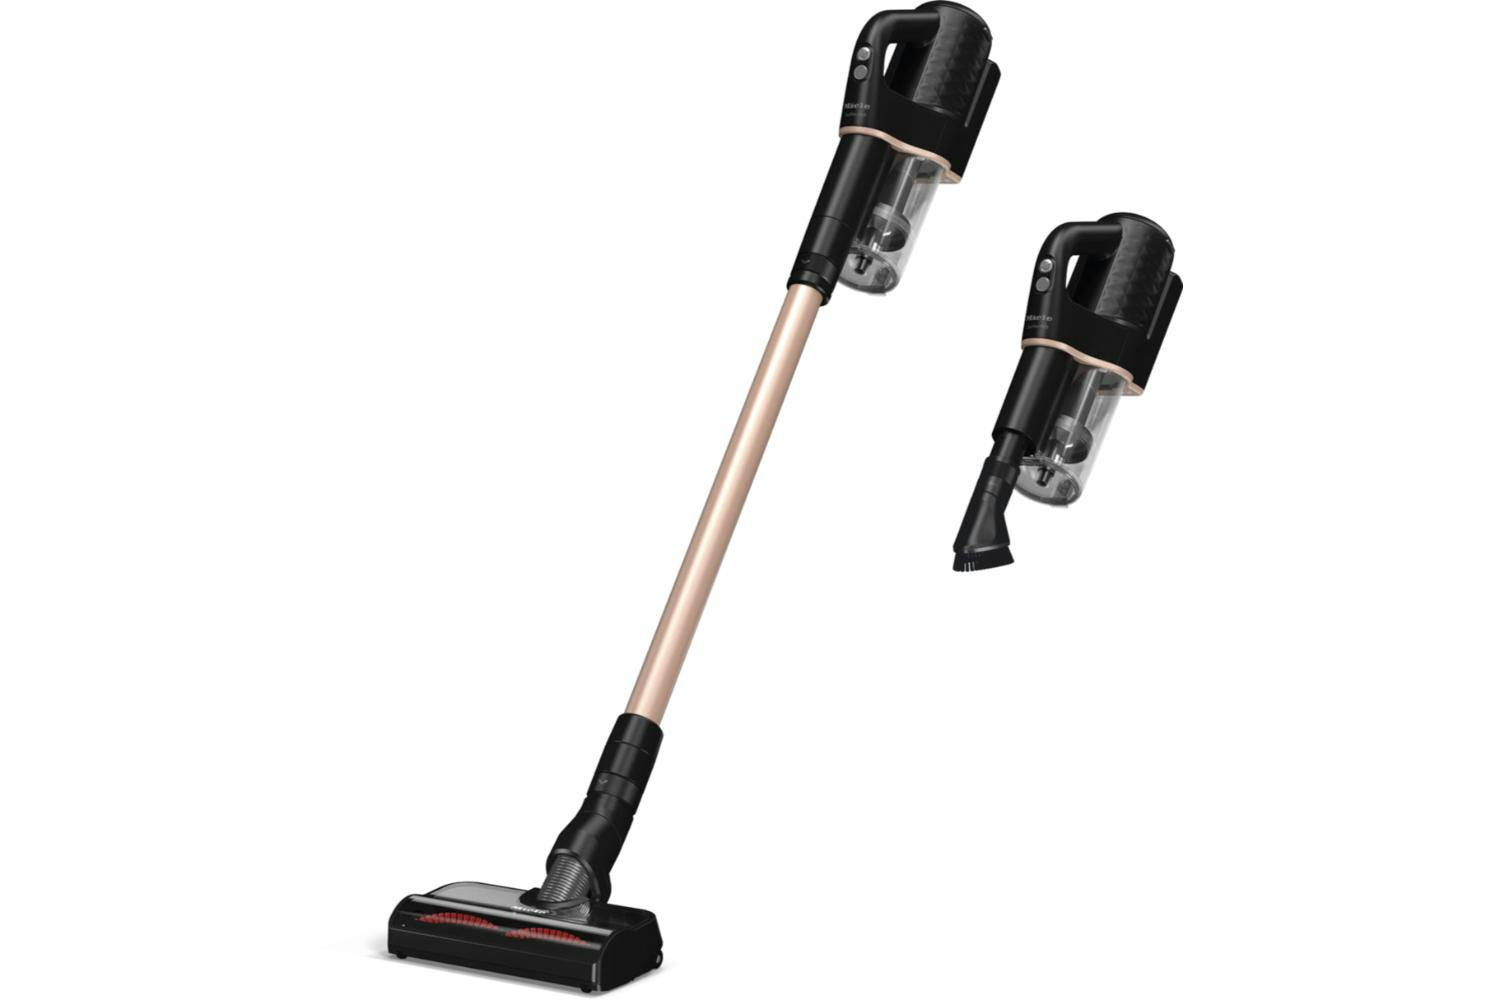 Miele Duoflex HX1 Total Care Cordless Stick Vacuum Cleaner | DUOFLEXHX1TOTAL